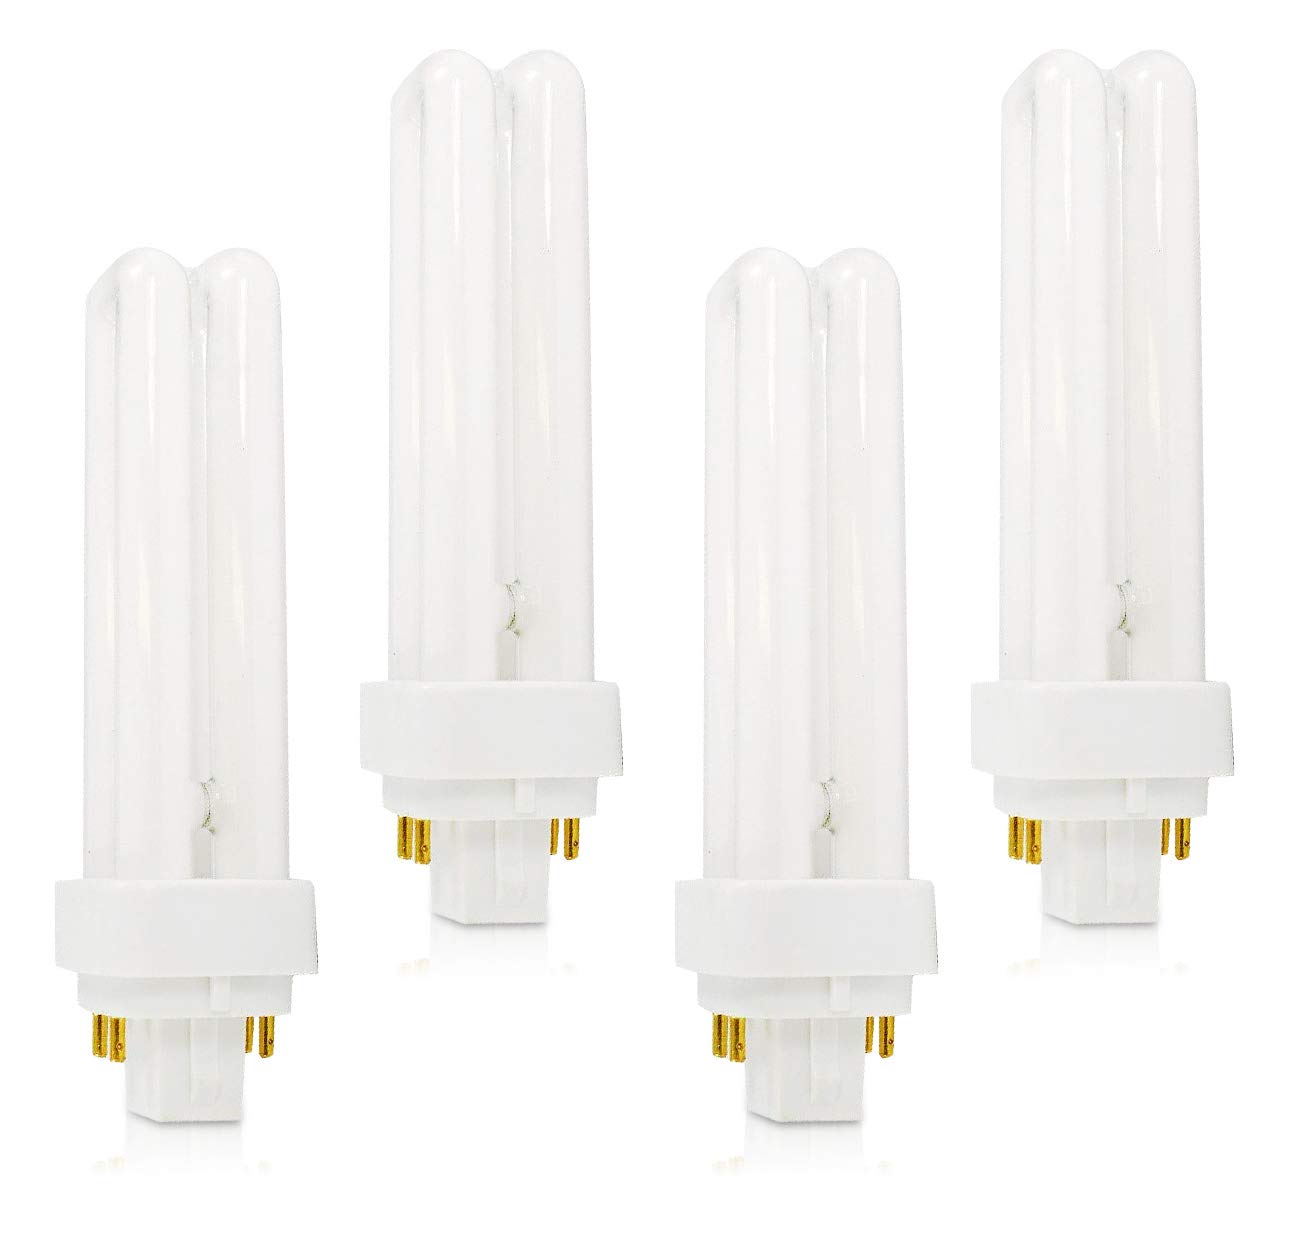 (4 Pack) PLC-13W 827, 4 Pin G24q-1, 13 Watt Double Tube, Compact Fluorescent Light Bulb, Replaces Philips 38325-7 and Sylvania 20682  - Like New